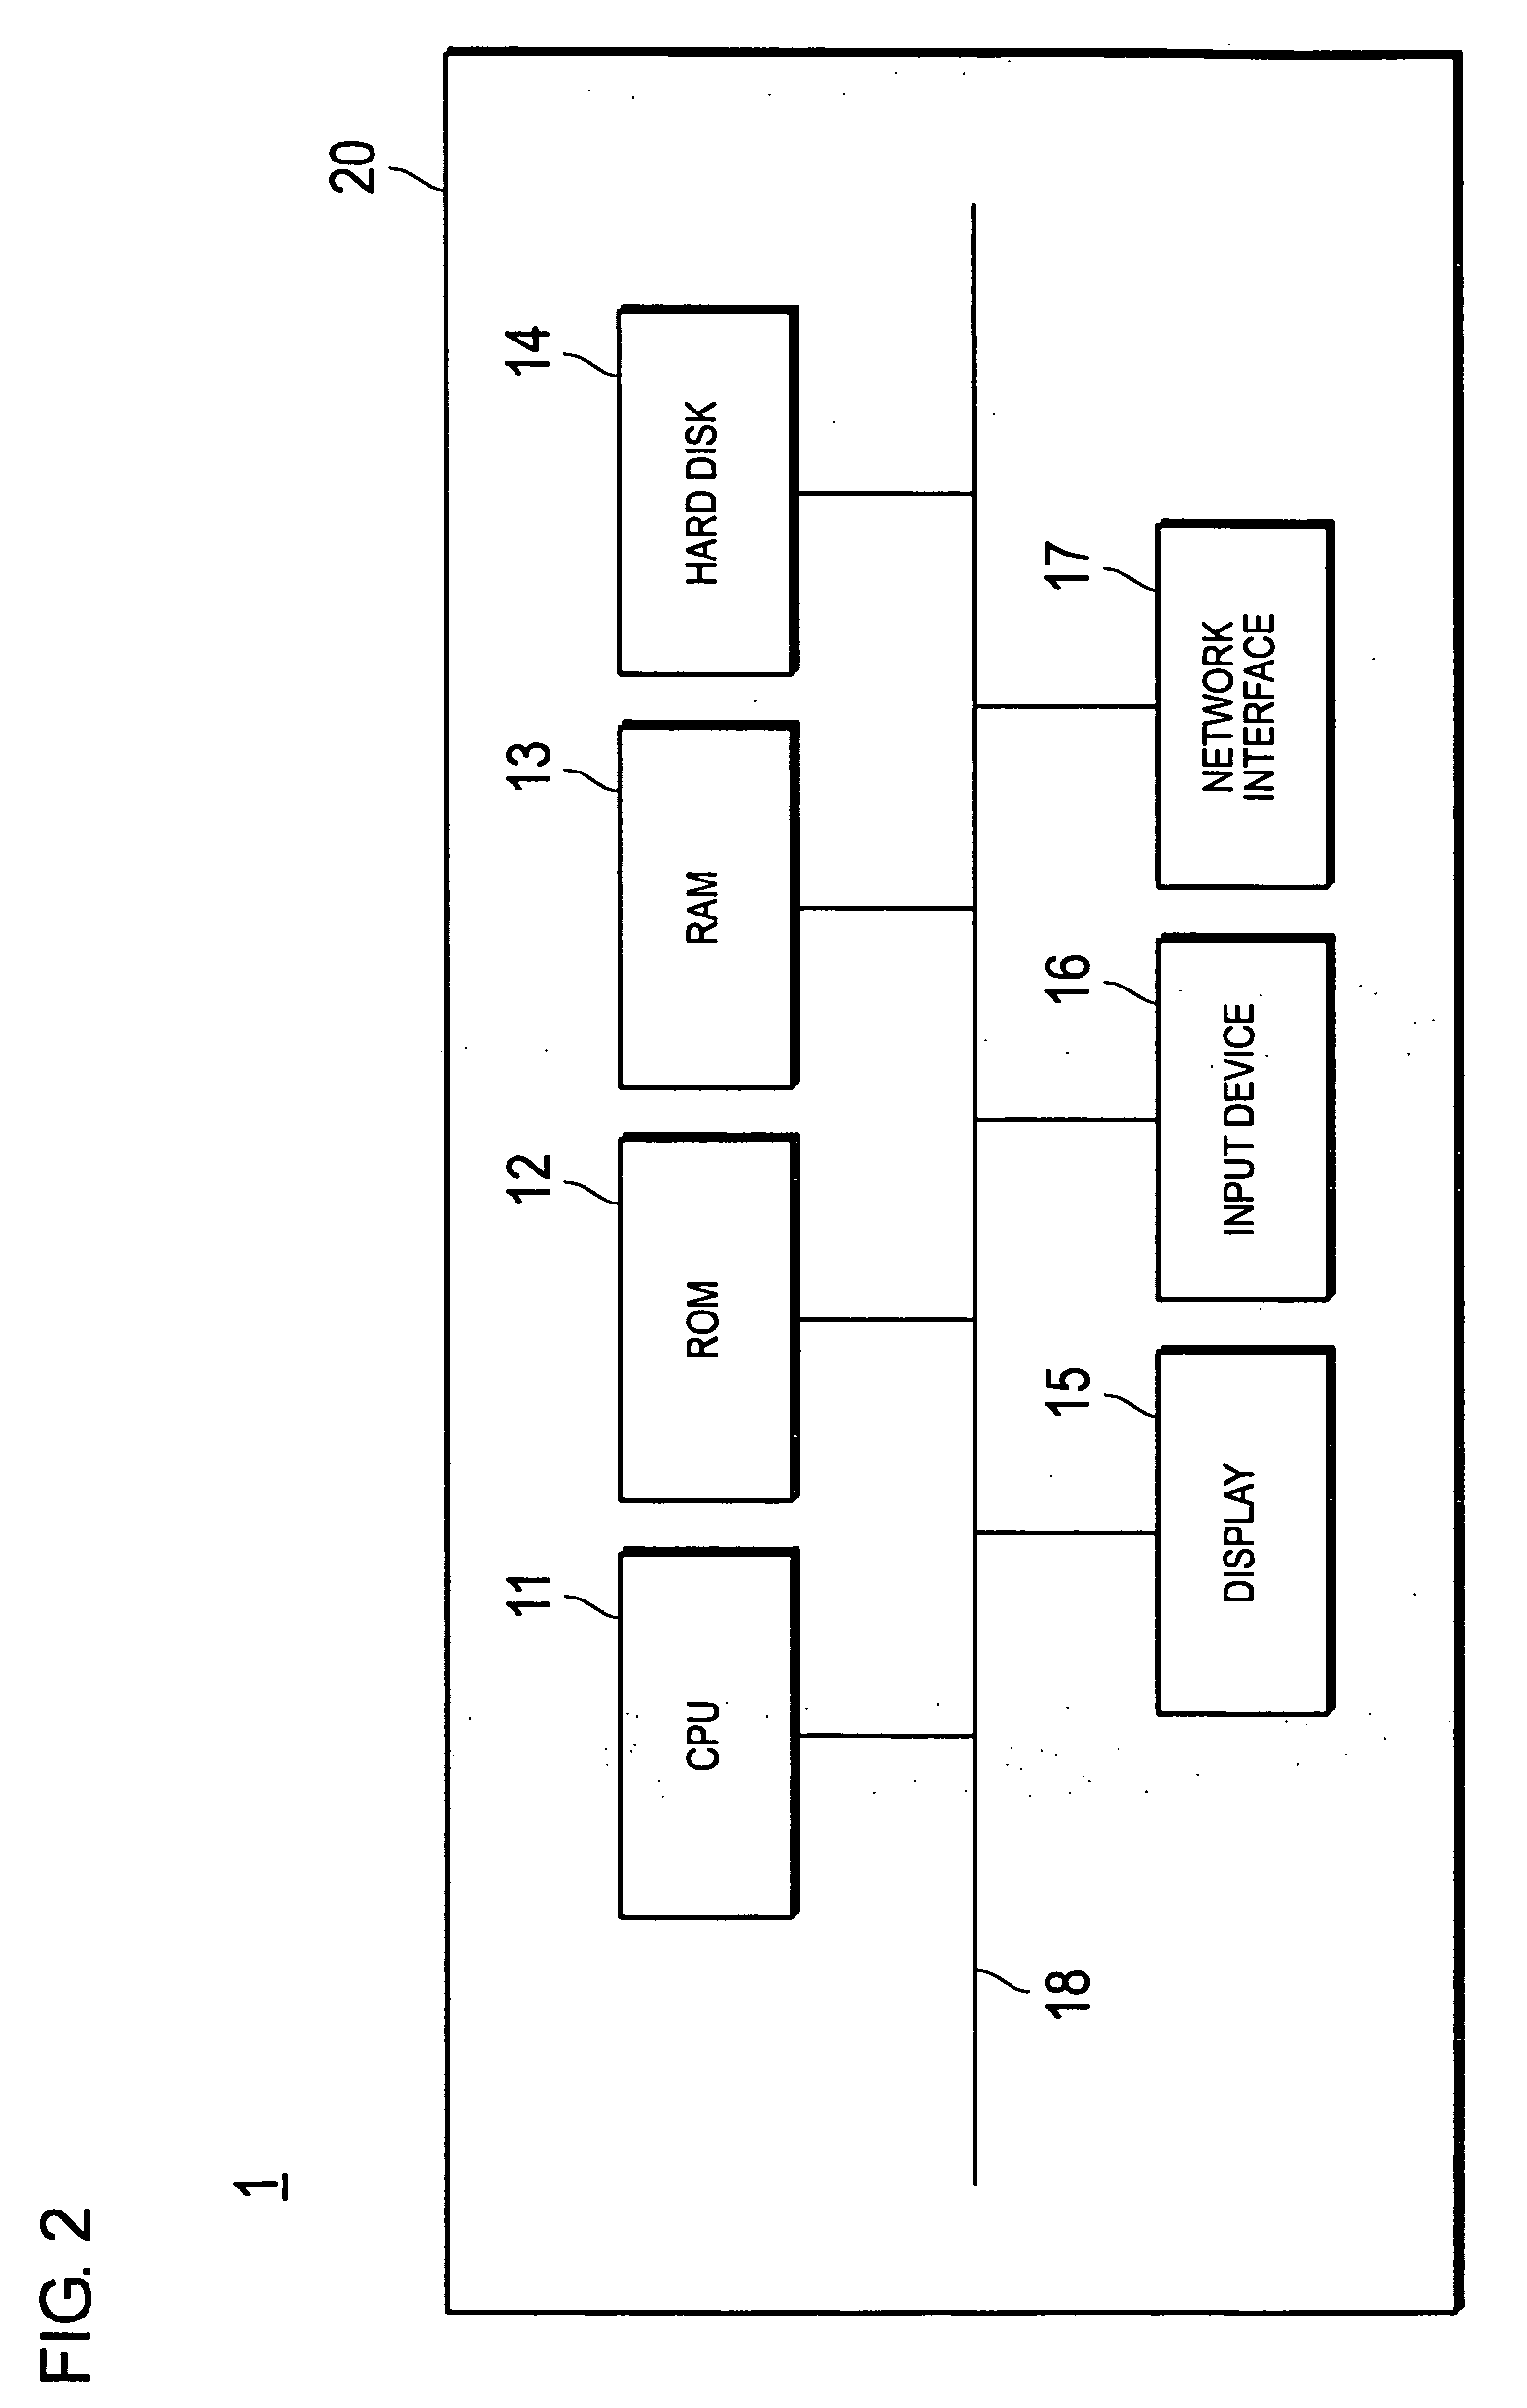 Controlling method for image forming apparatus